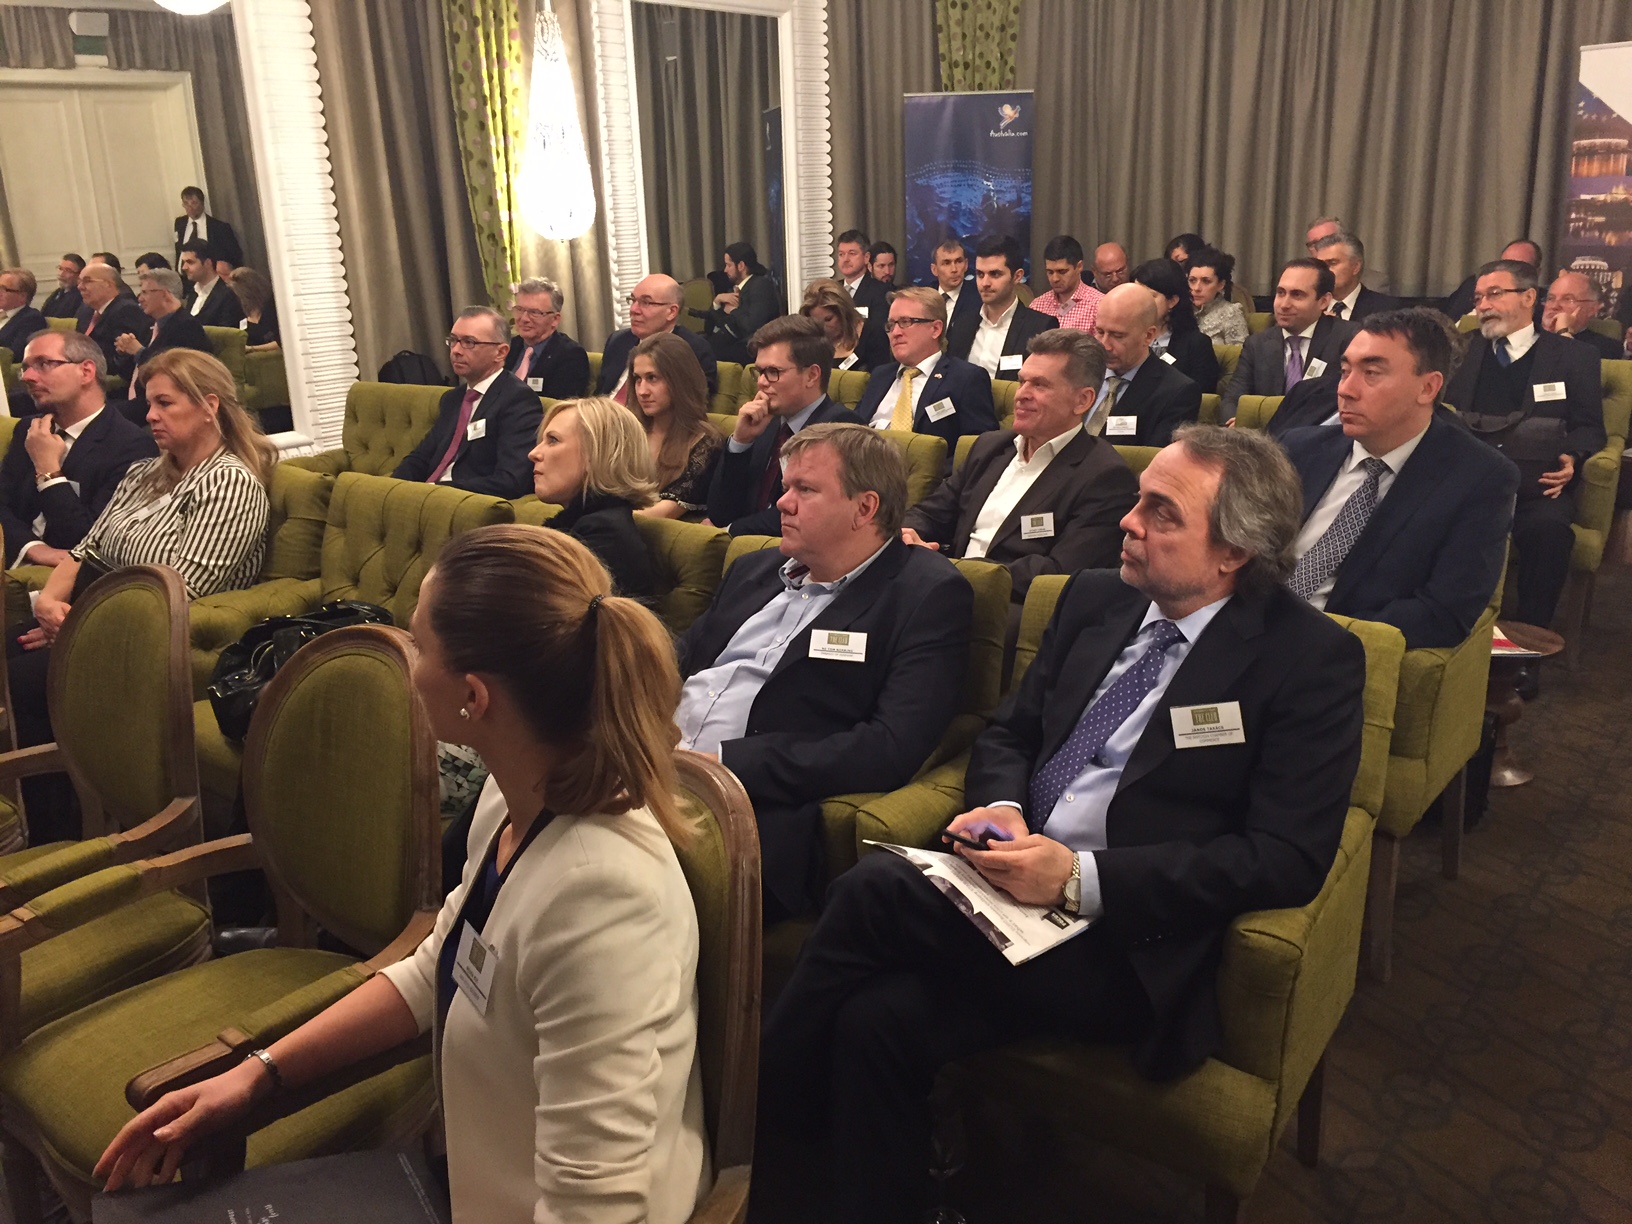 Hungary trade event _ audience